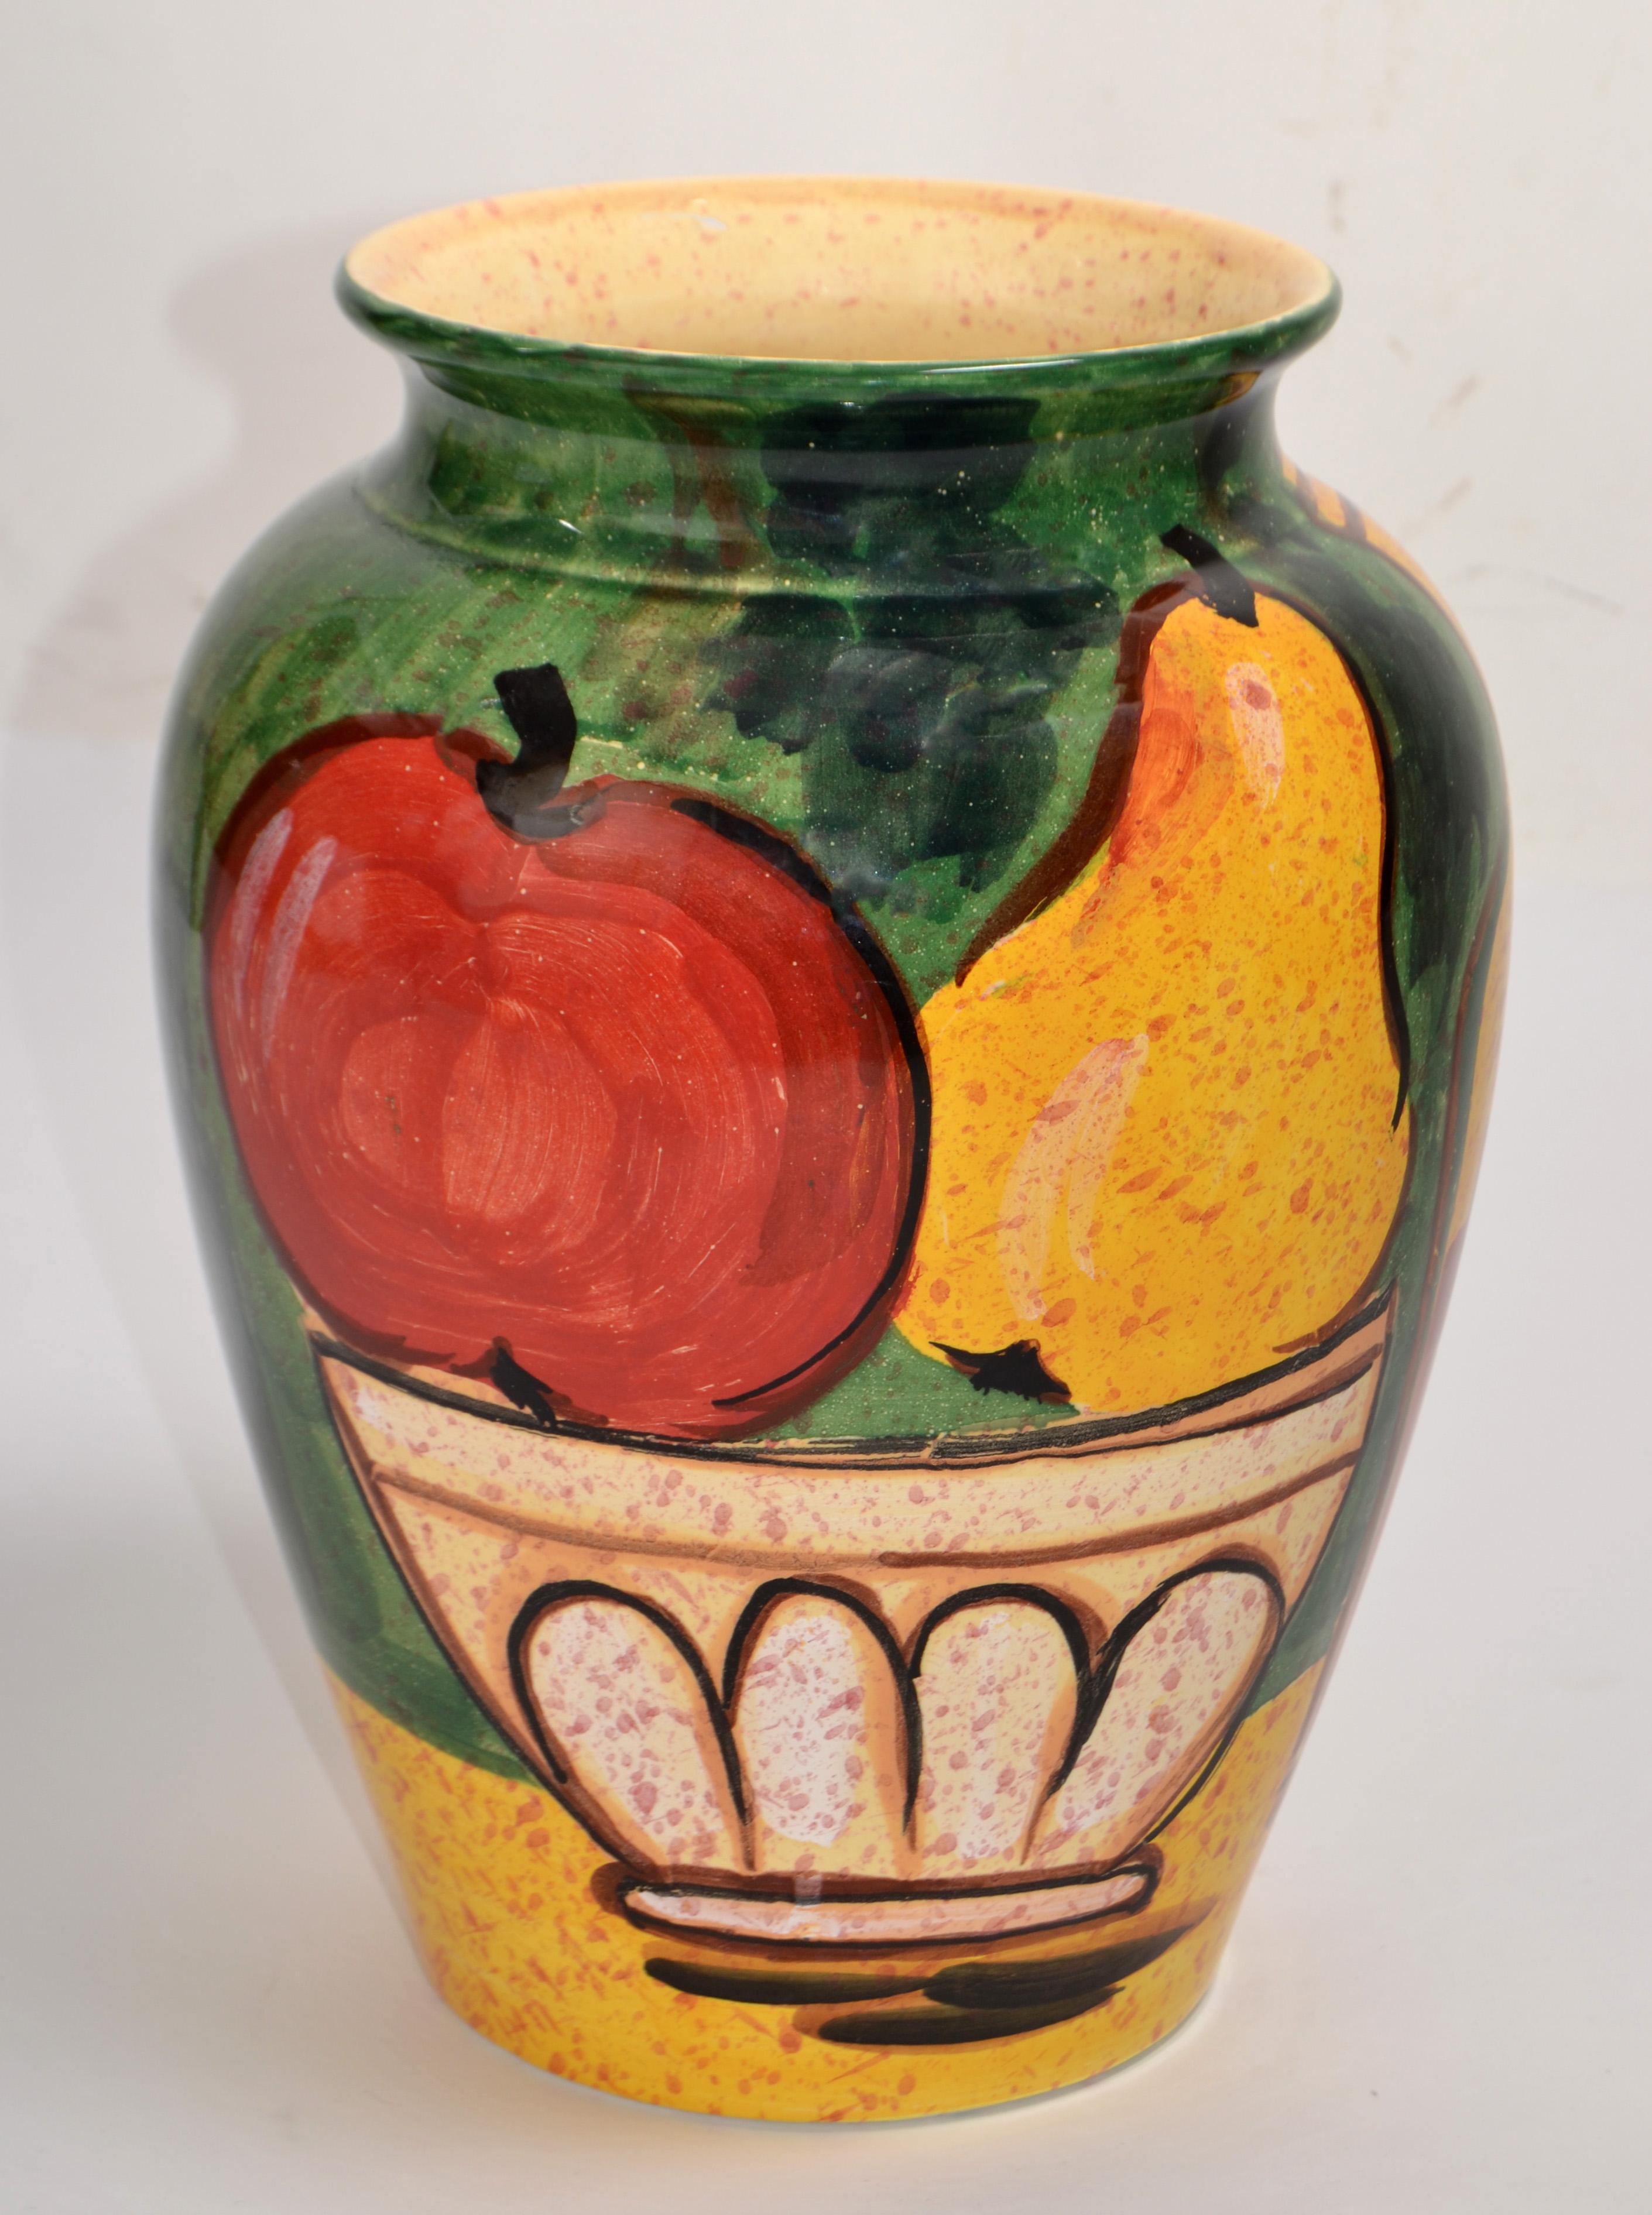 Vintage Italian Hand Painted Still Life Fruit in a Basket Ceramic Vase from the 1980s by Bellini Studio.
Depicting an Apple and a Pear in a Basket, very colorful and glazed.
Makers Mark at the Base, Bellini PIU, Made In Italy.     
A great Art Vase